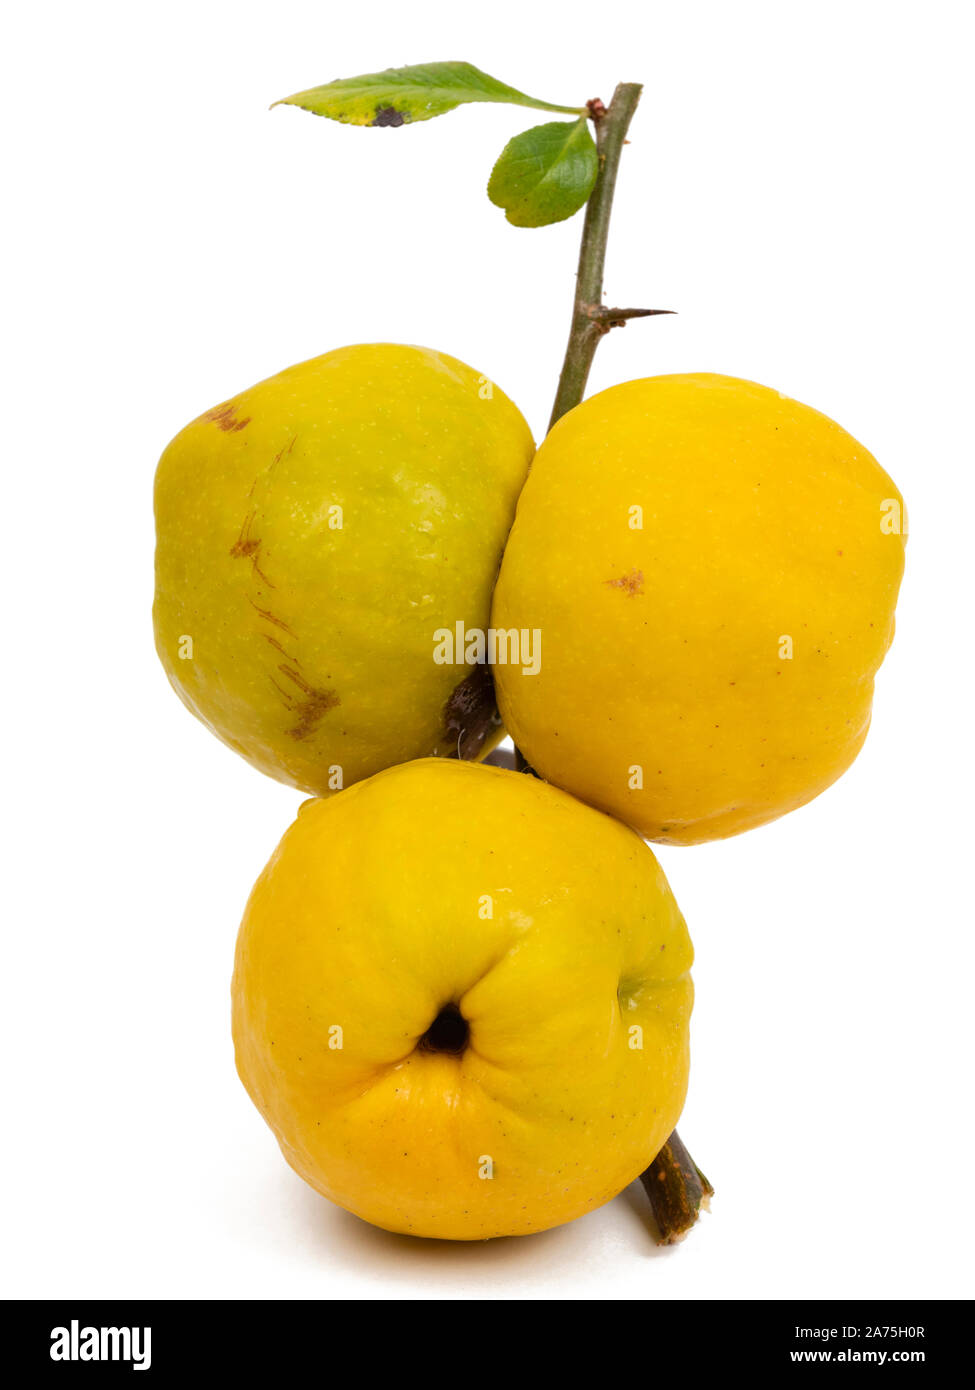 Karin, fruit de l'automne comestibles hardy coing japonais arbuste, Chaenomeles x superba 'Crimson and Gold' isolated on white Banque D'Images